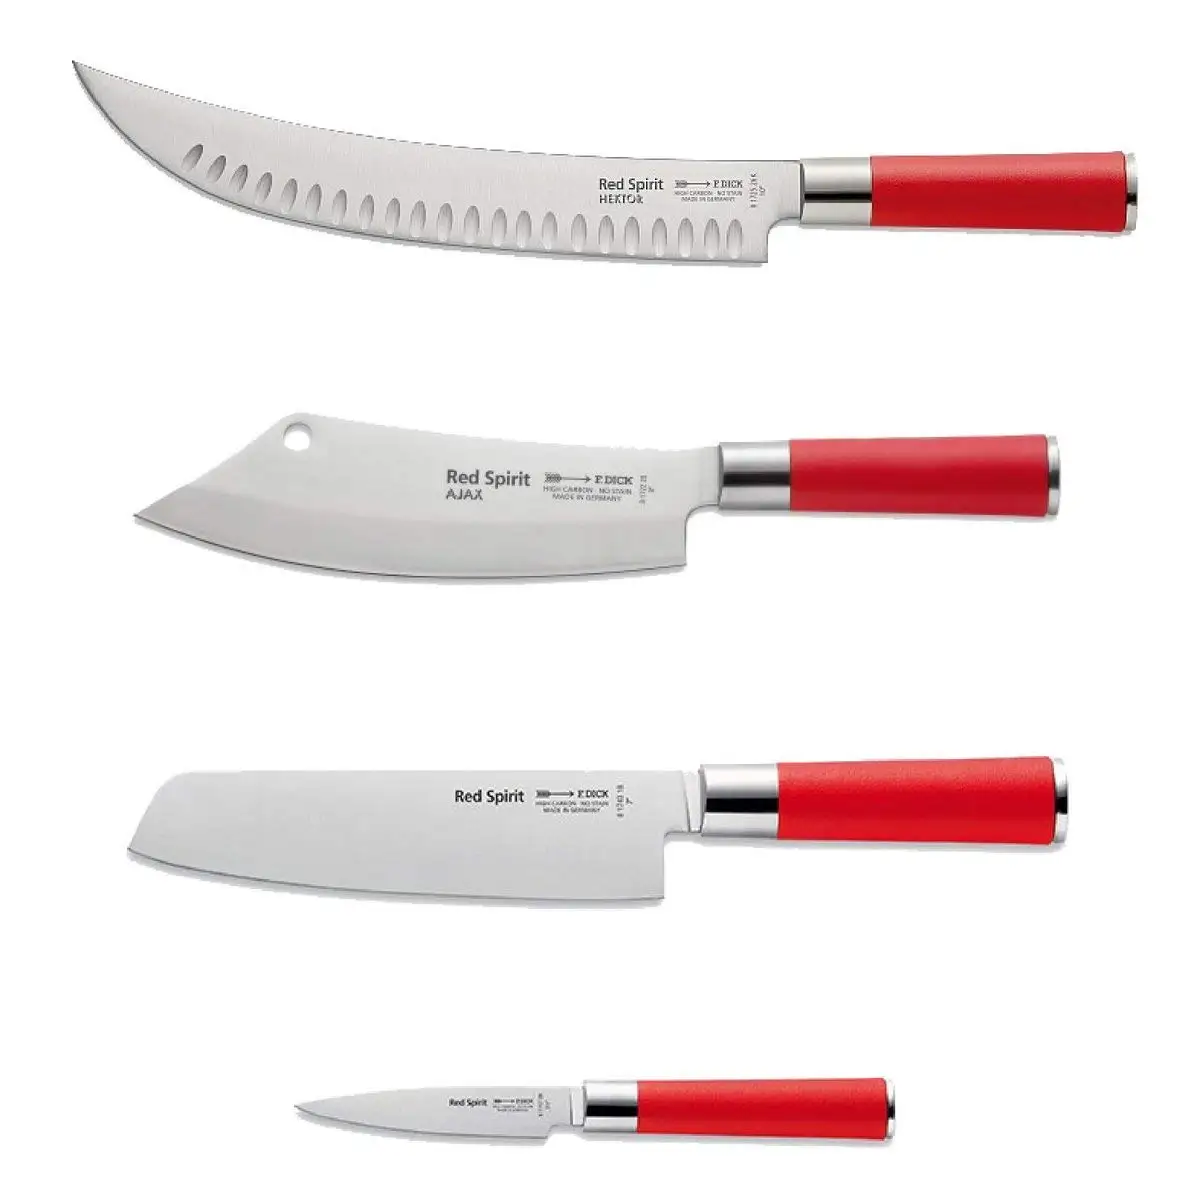 F dick. German Stainless Steel ножи. Red Spirit ножи. Нож Red Spirit Chef's Knife Ajax. F.dick ножи.